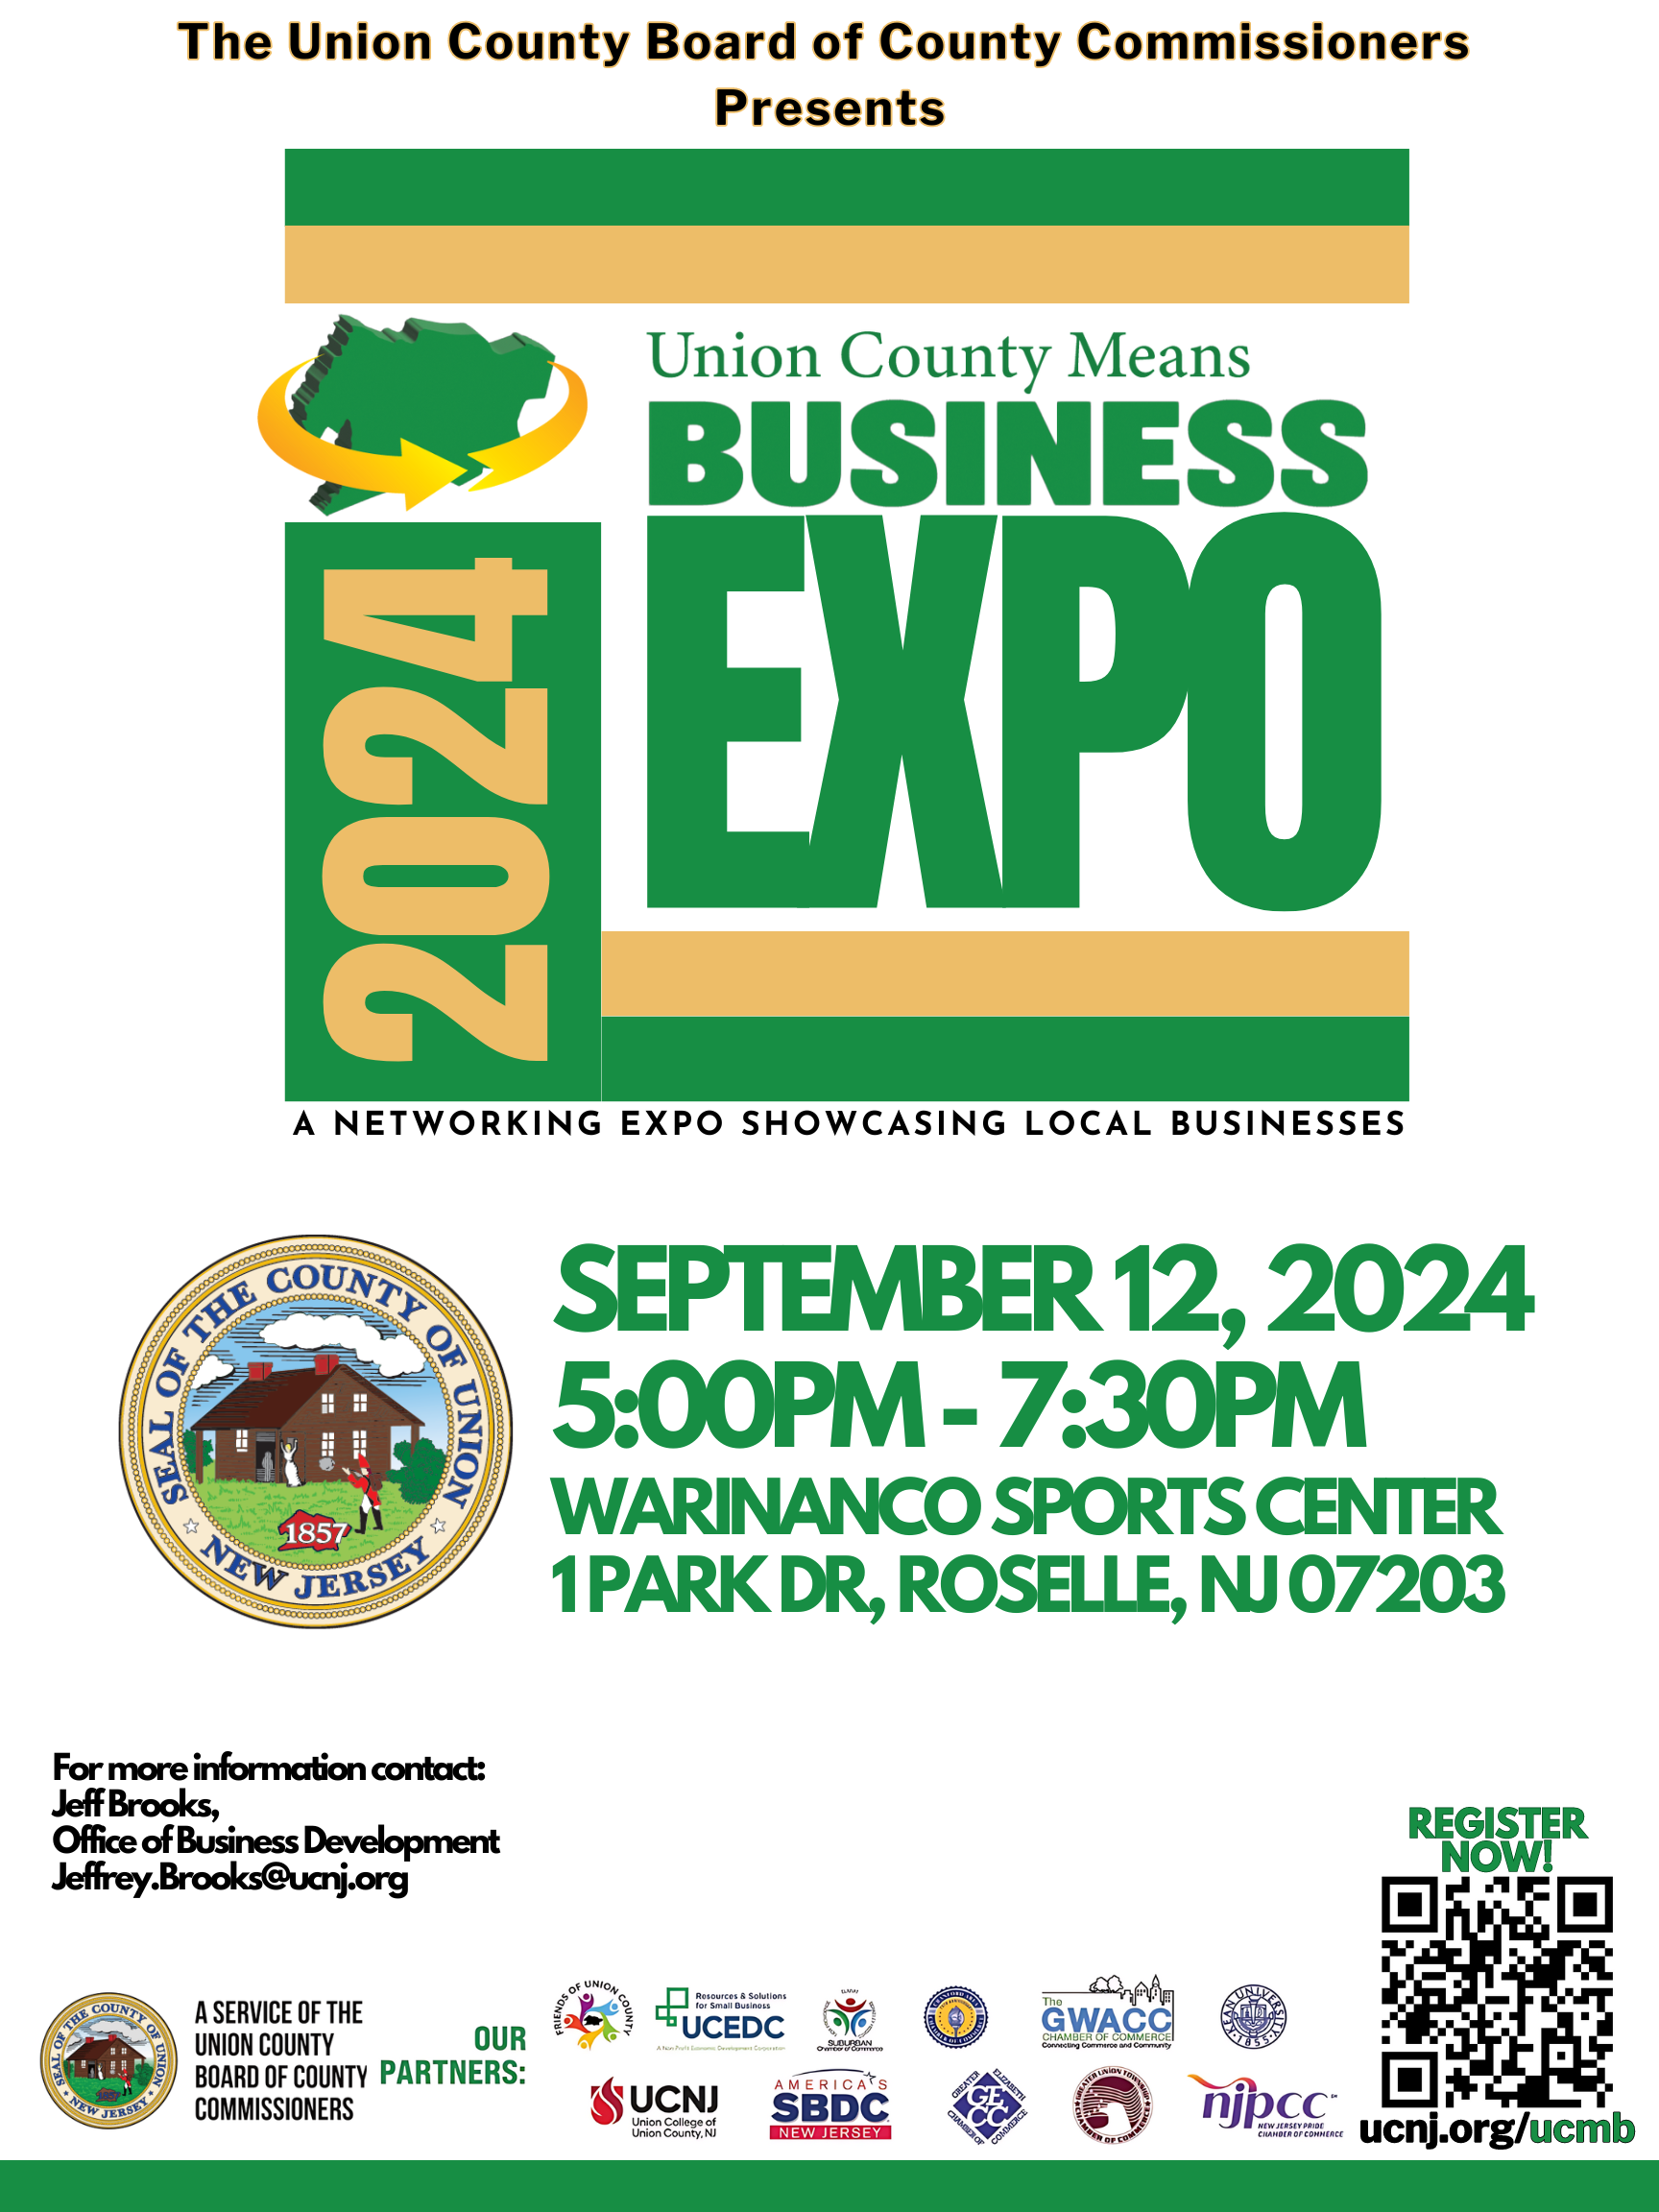 Union County Means Business Expo Returns on September 12th at Warinanco Sports Center